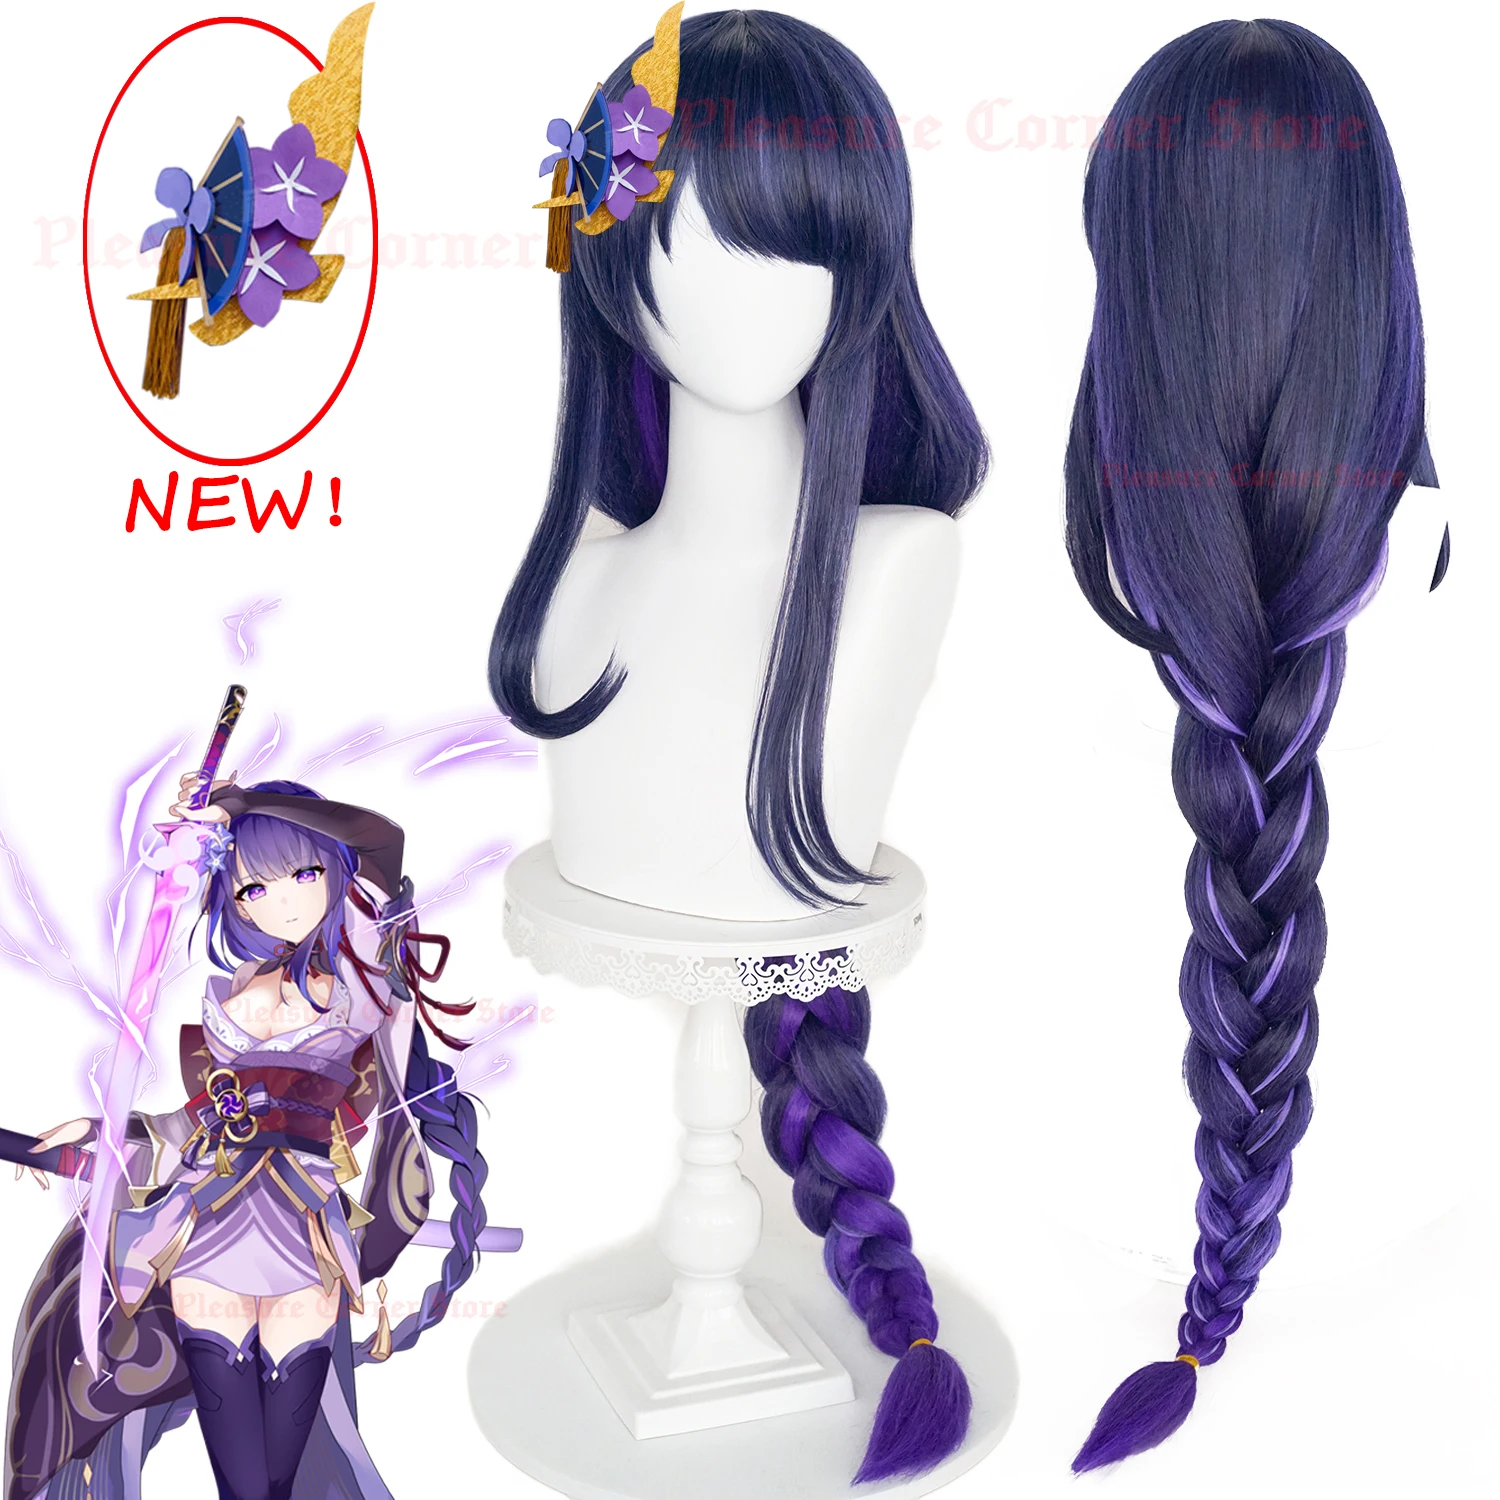 

Game Anime Genshin Impact Raiden Shogun Cosplay Wig Pre Styled 110cm Long Heat Resistant Synthetic Purple Mixed Color Baal Wigs